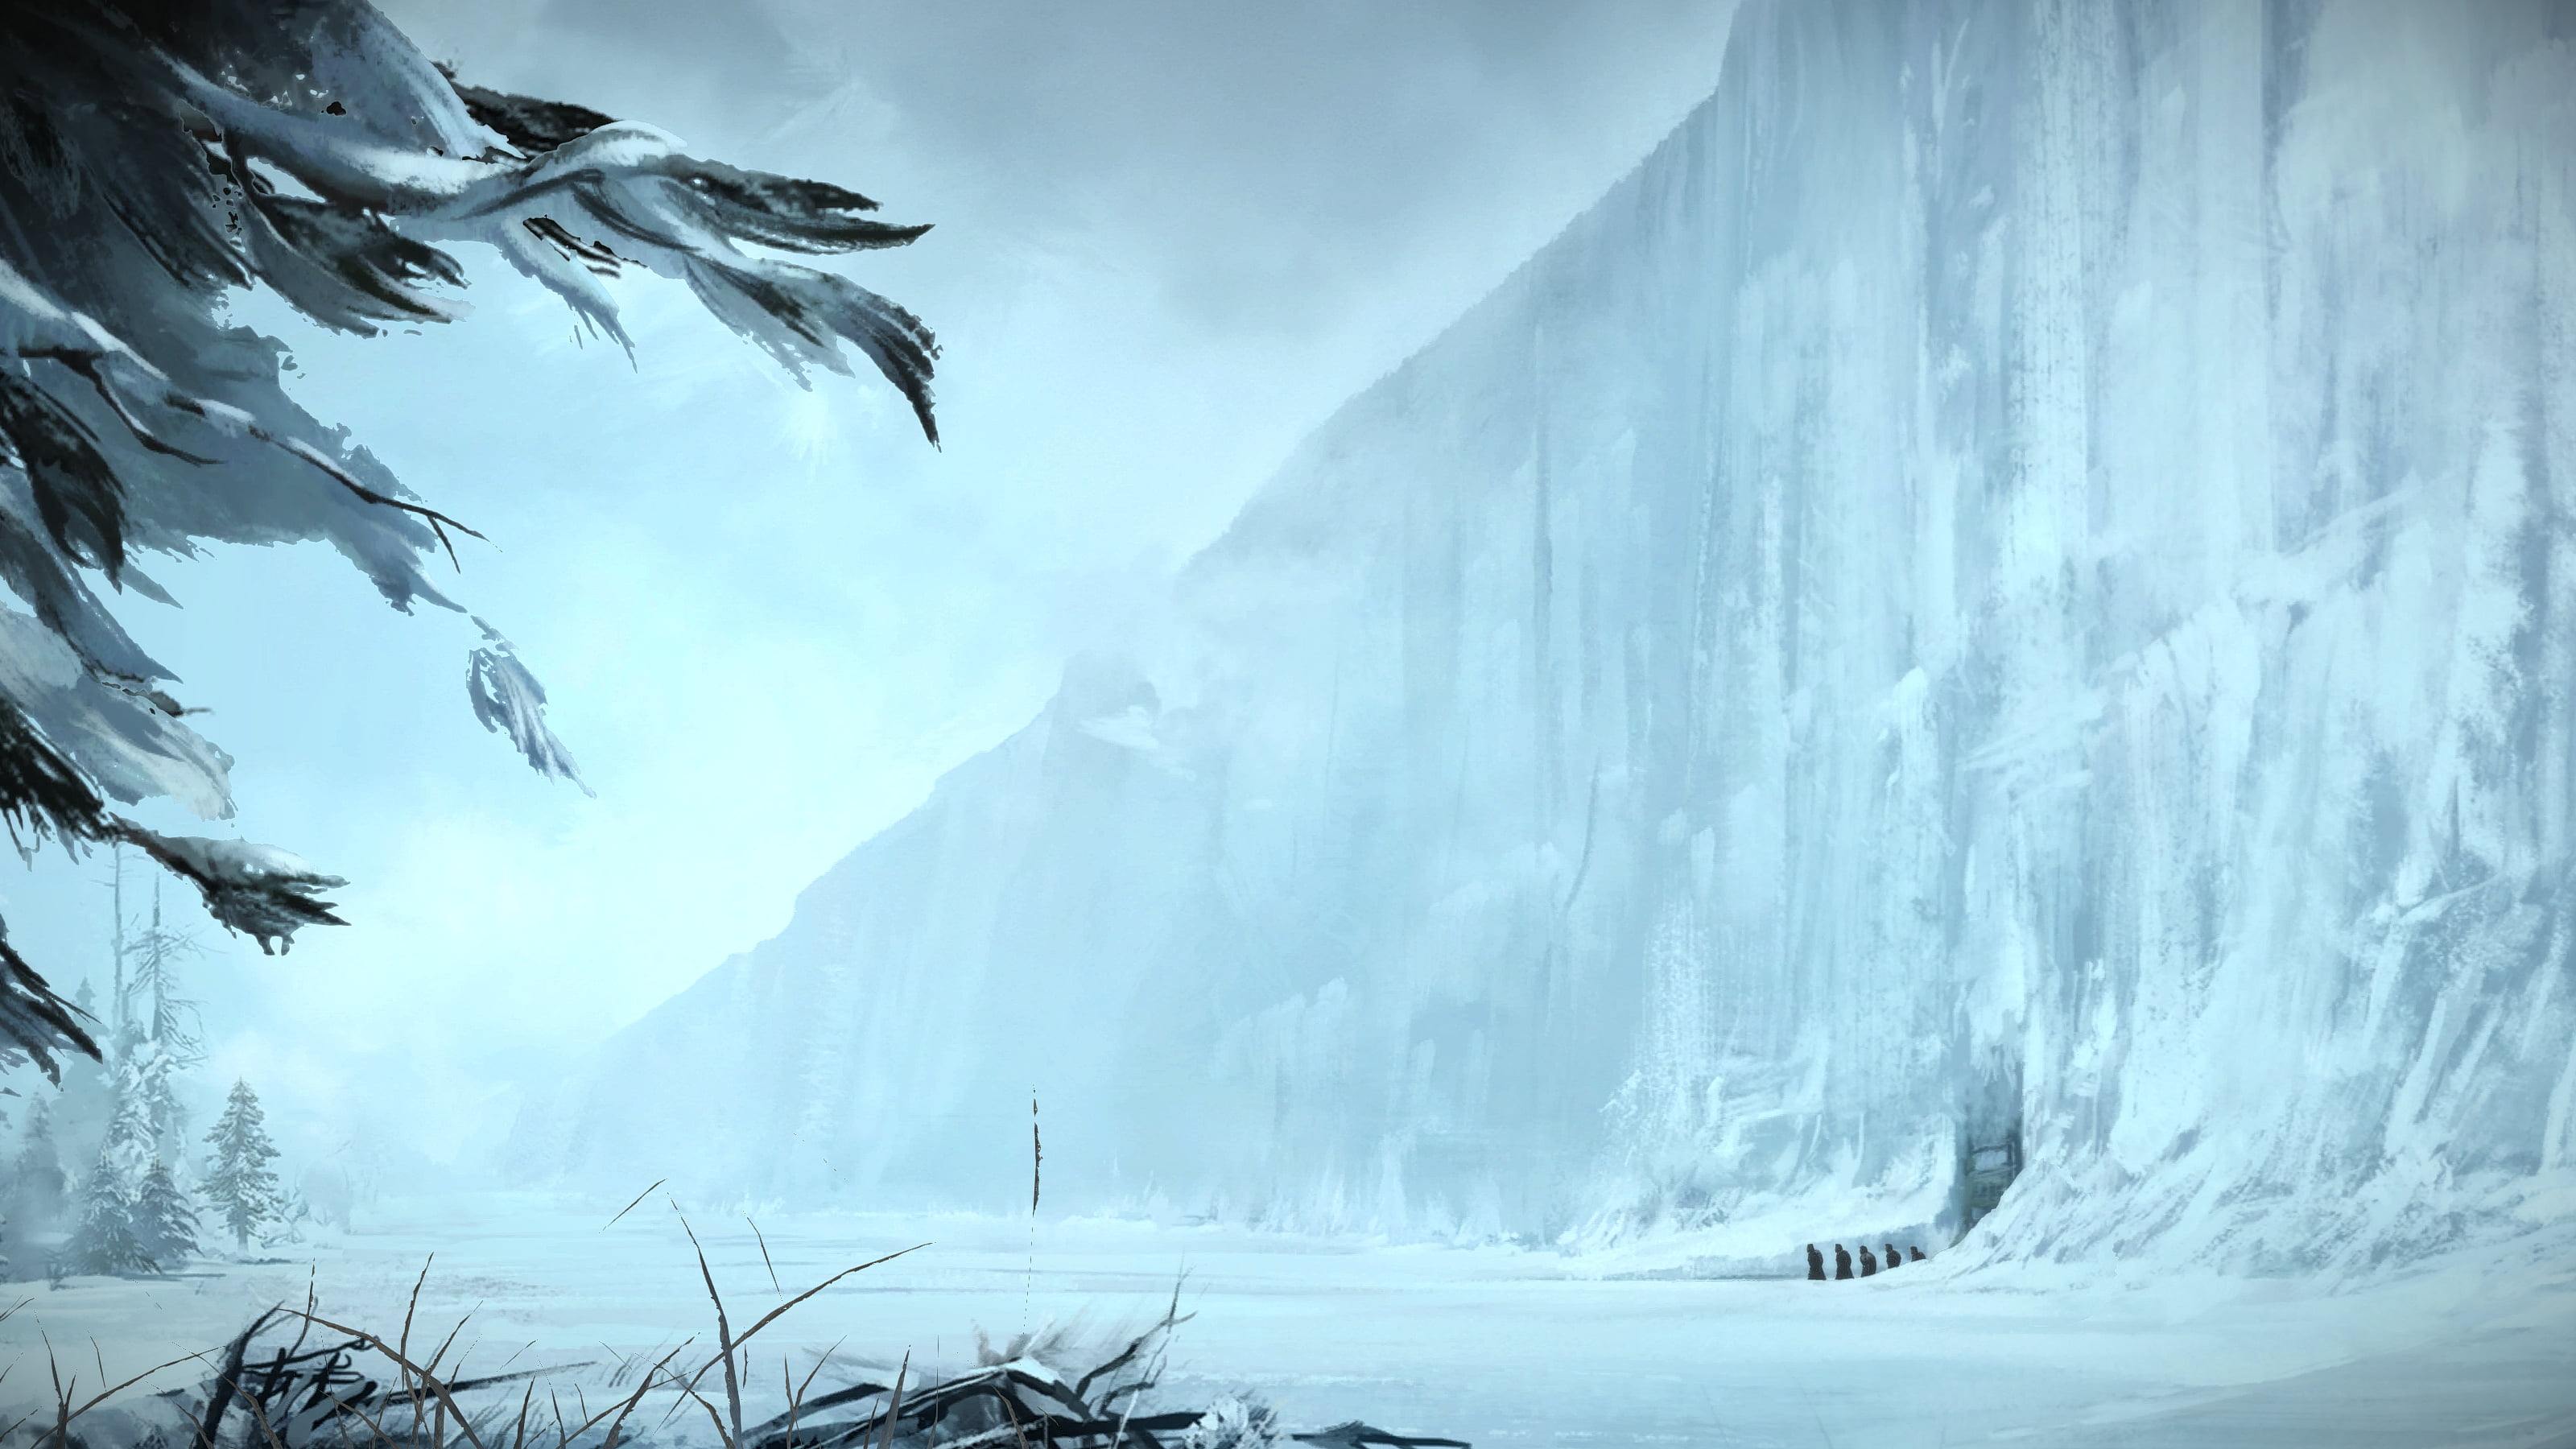 Game of Thrones Ice Wall, Game of Thrones: A Telltale Games Series